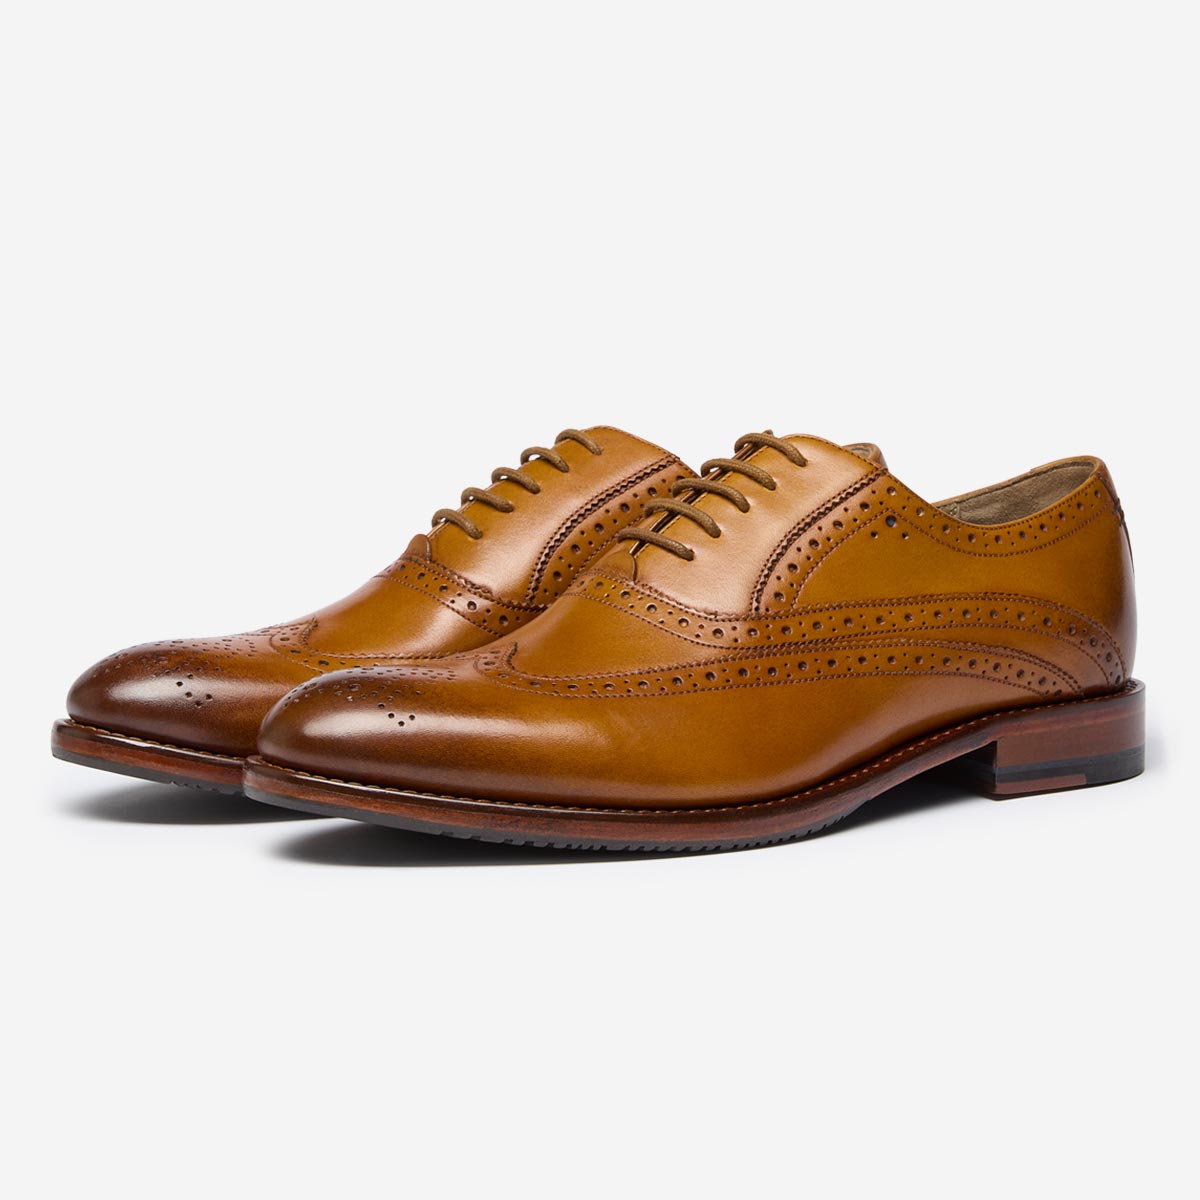 Ledwell Light Tan Oxford Brogues | Men's Shoes | Oliver Sweeney